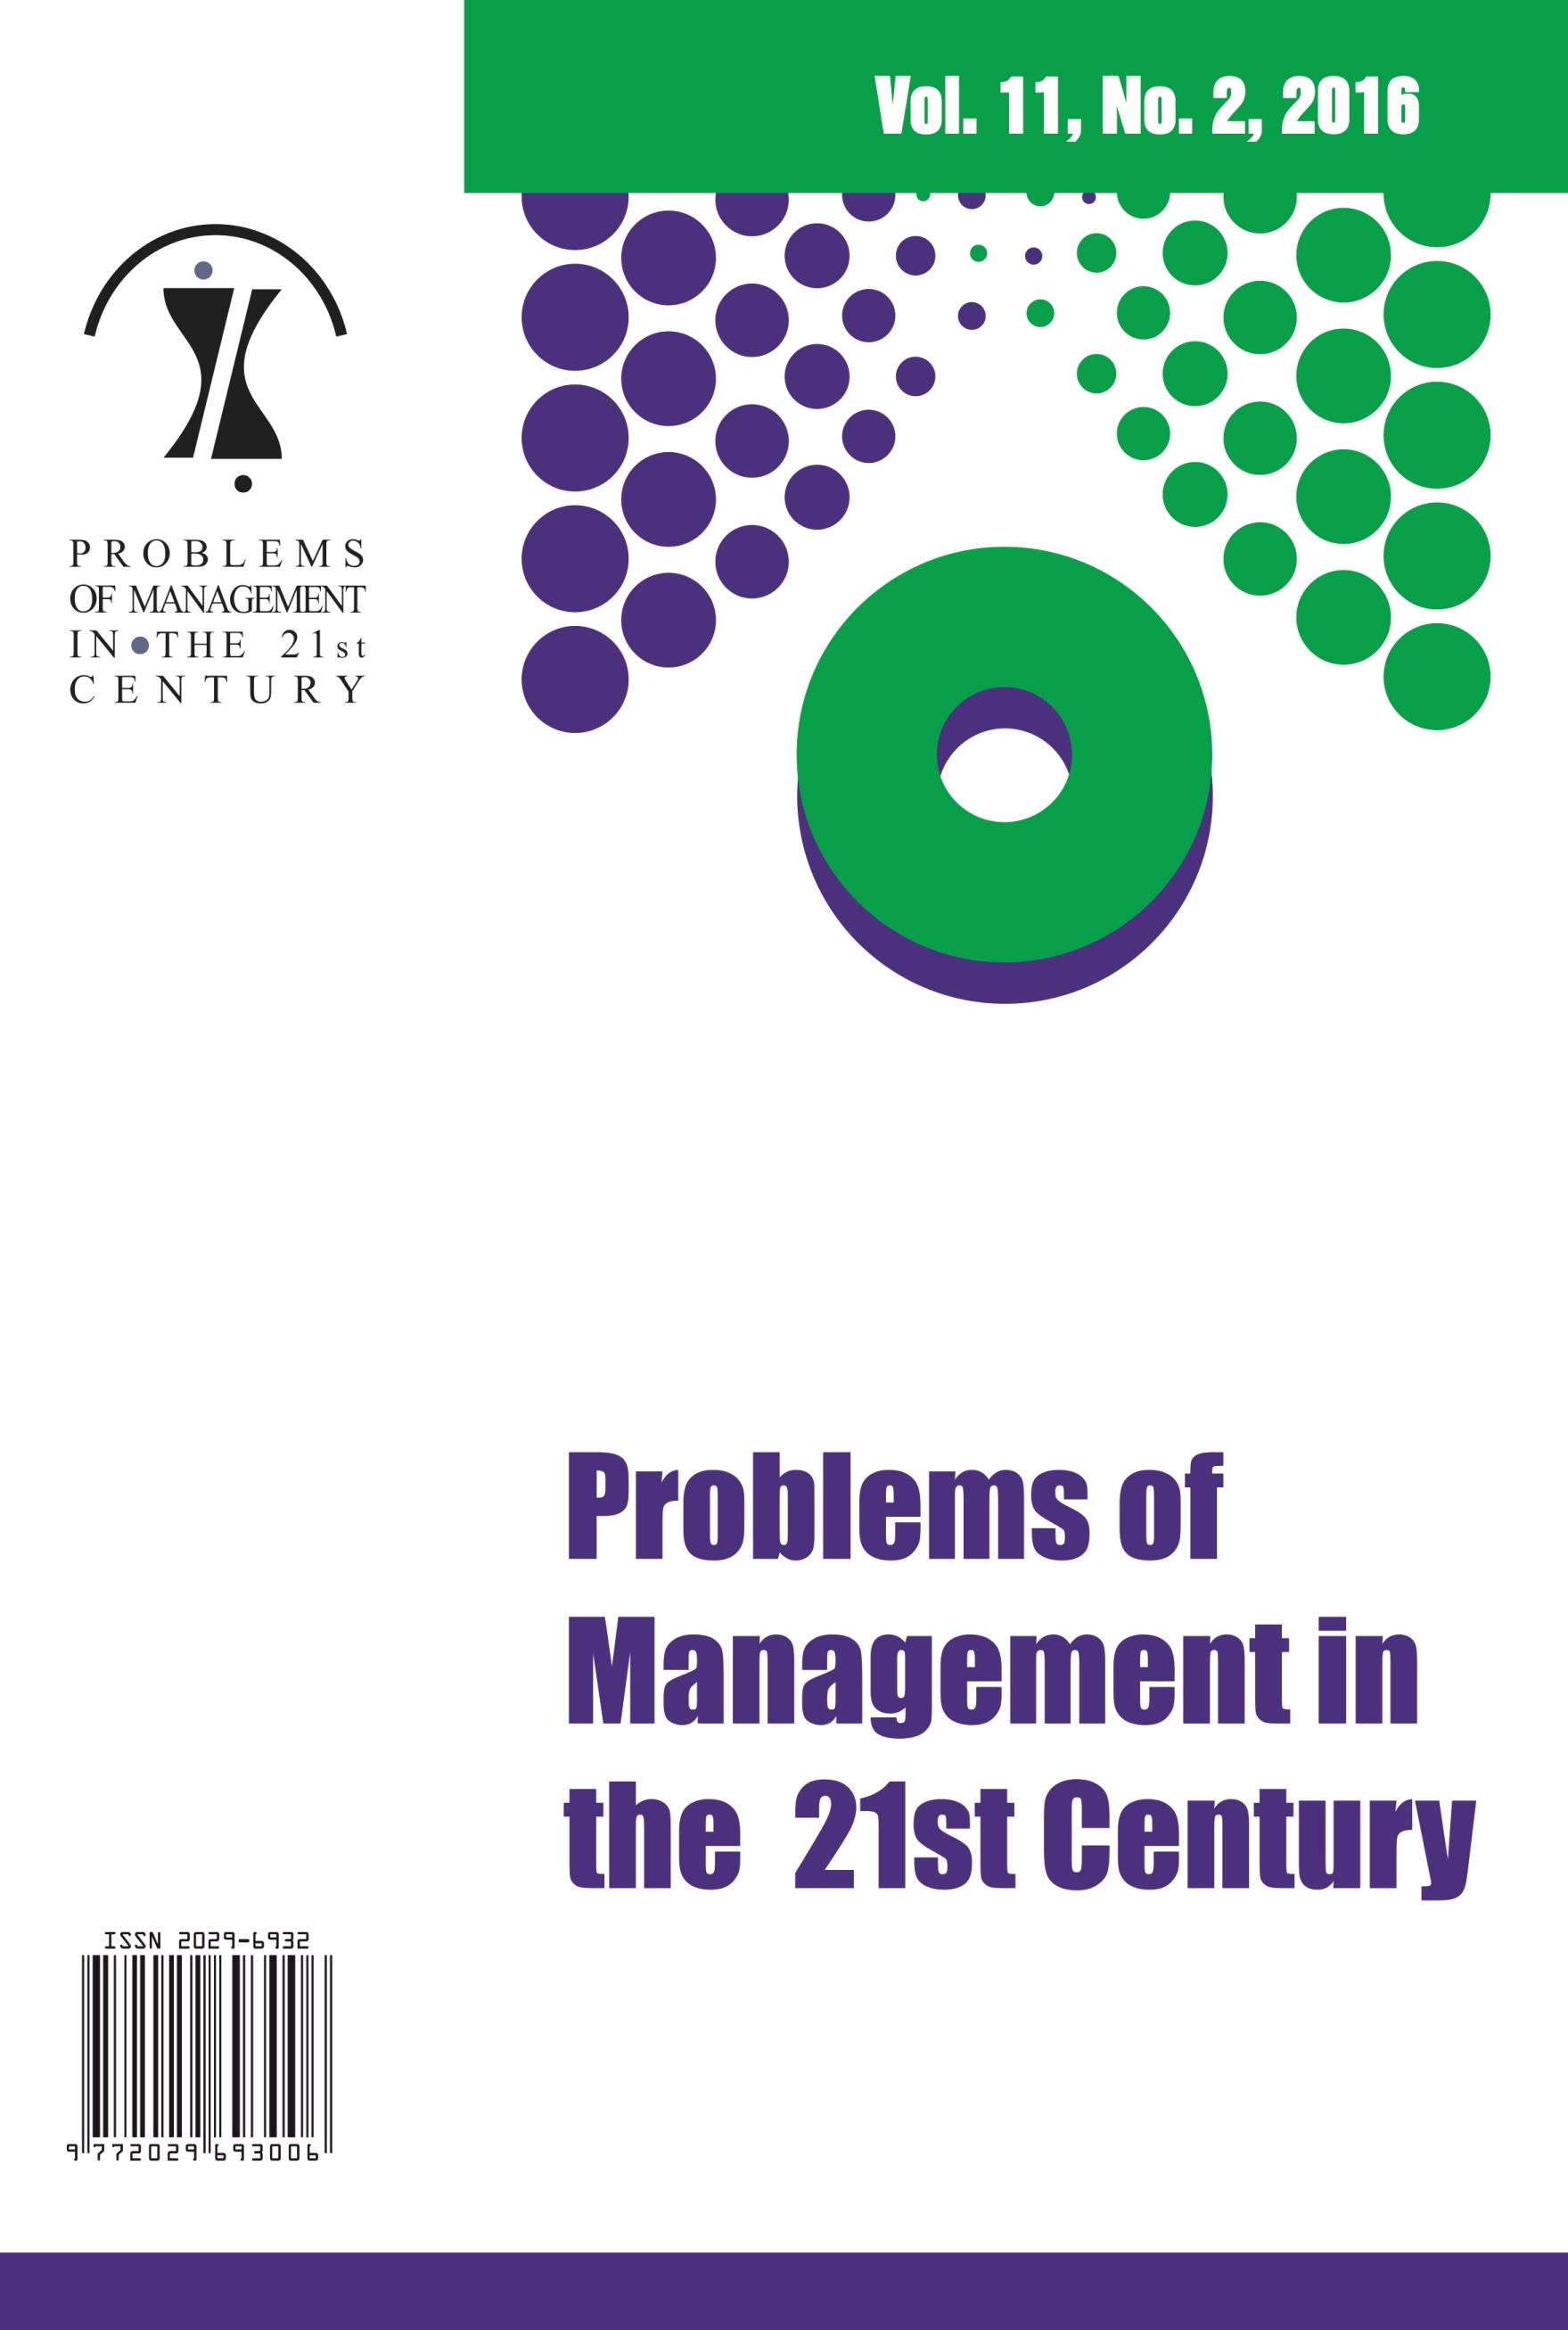 STRATEGIC MANAGEMENT PRACTICES AS A KEY DETERMINANT OF SUPERIOR NON-GOVERNMENTAL ORGANIZATIONS PERFORMANCE Cover Image